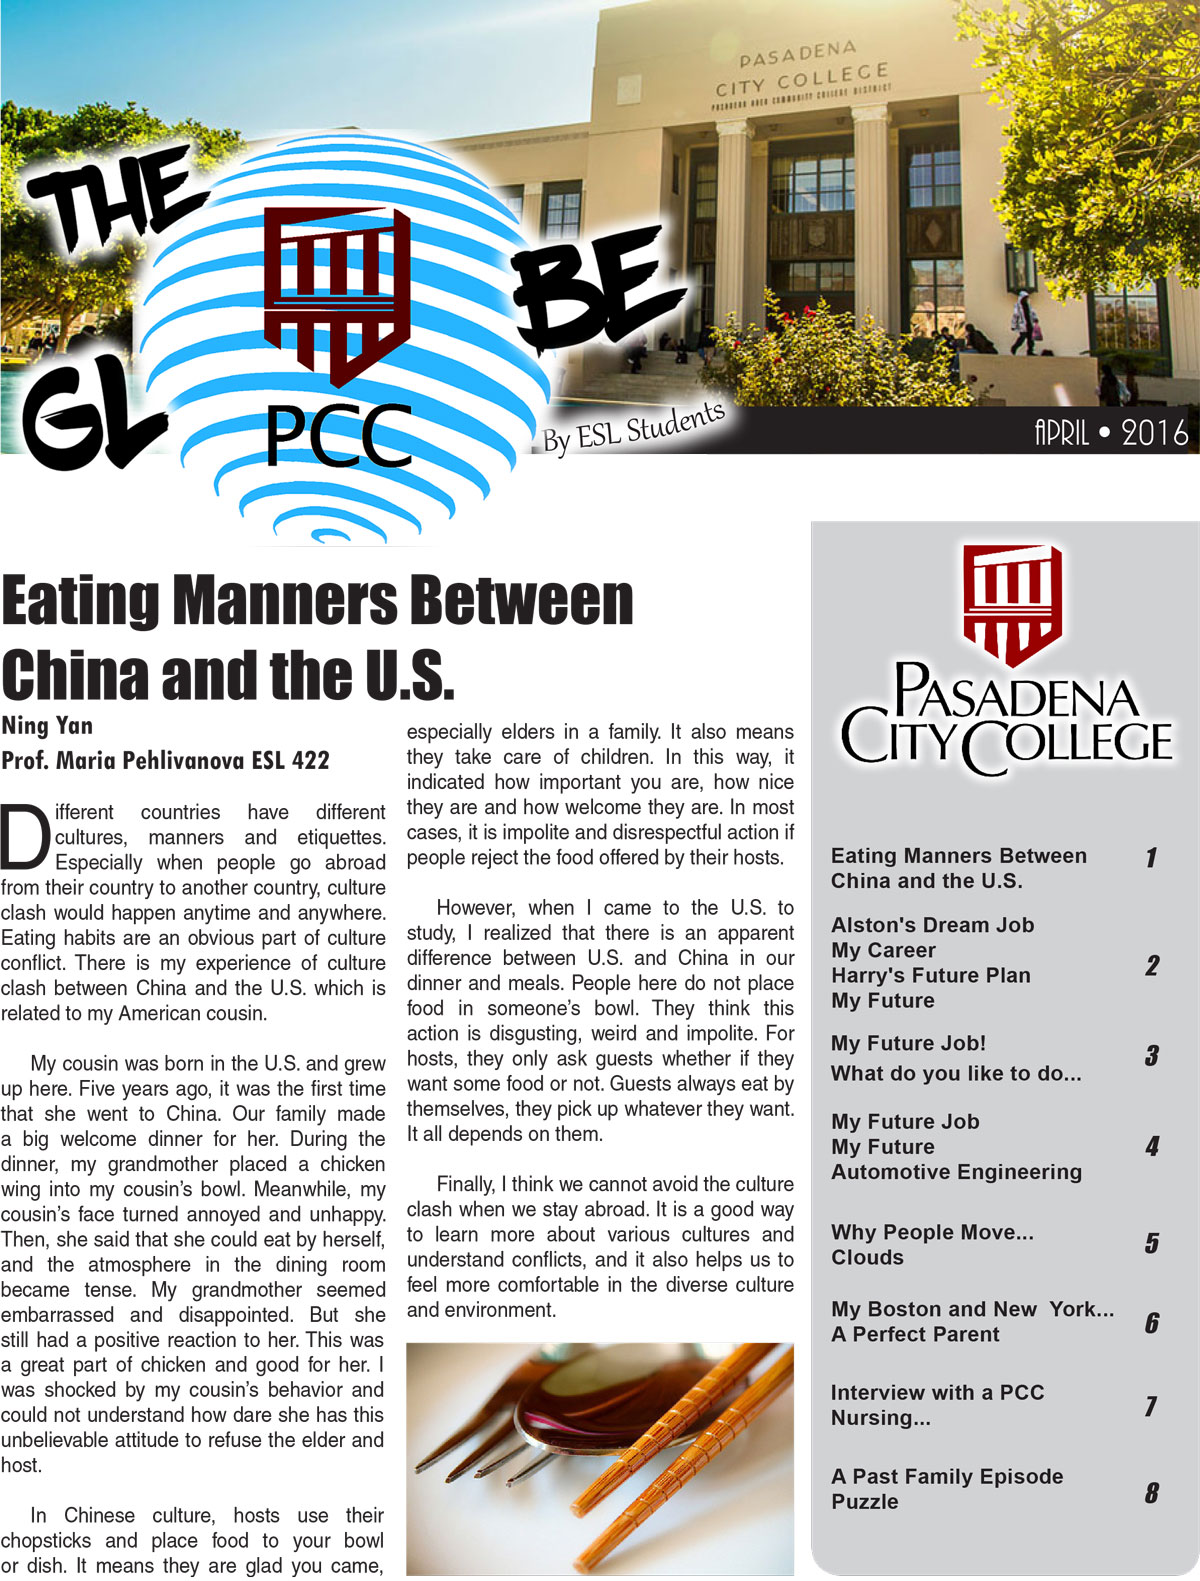 Screenshot of the cover of the December 2015 issue of the Globe.